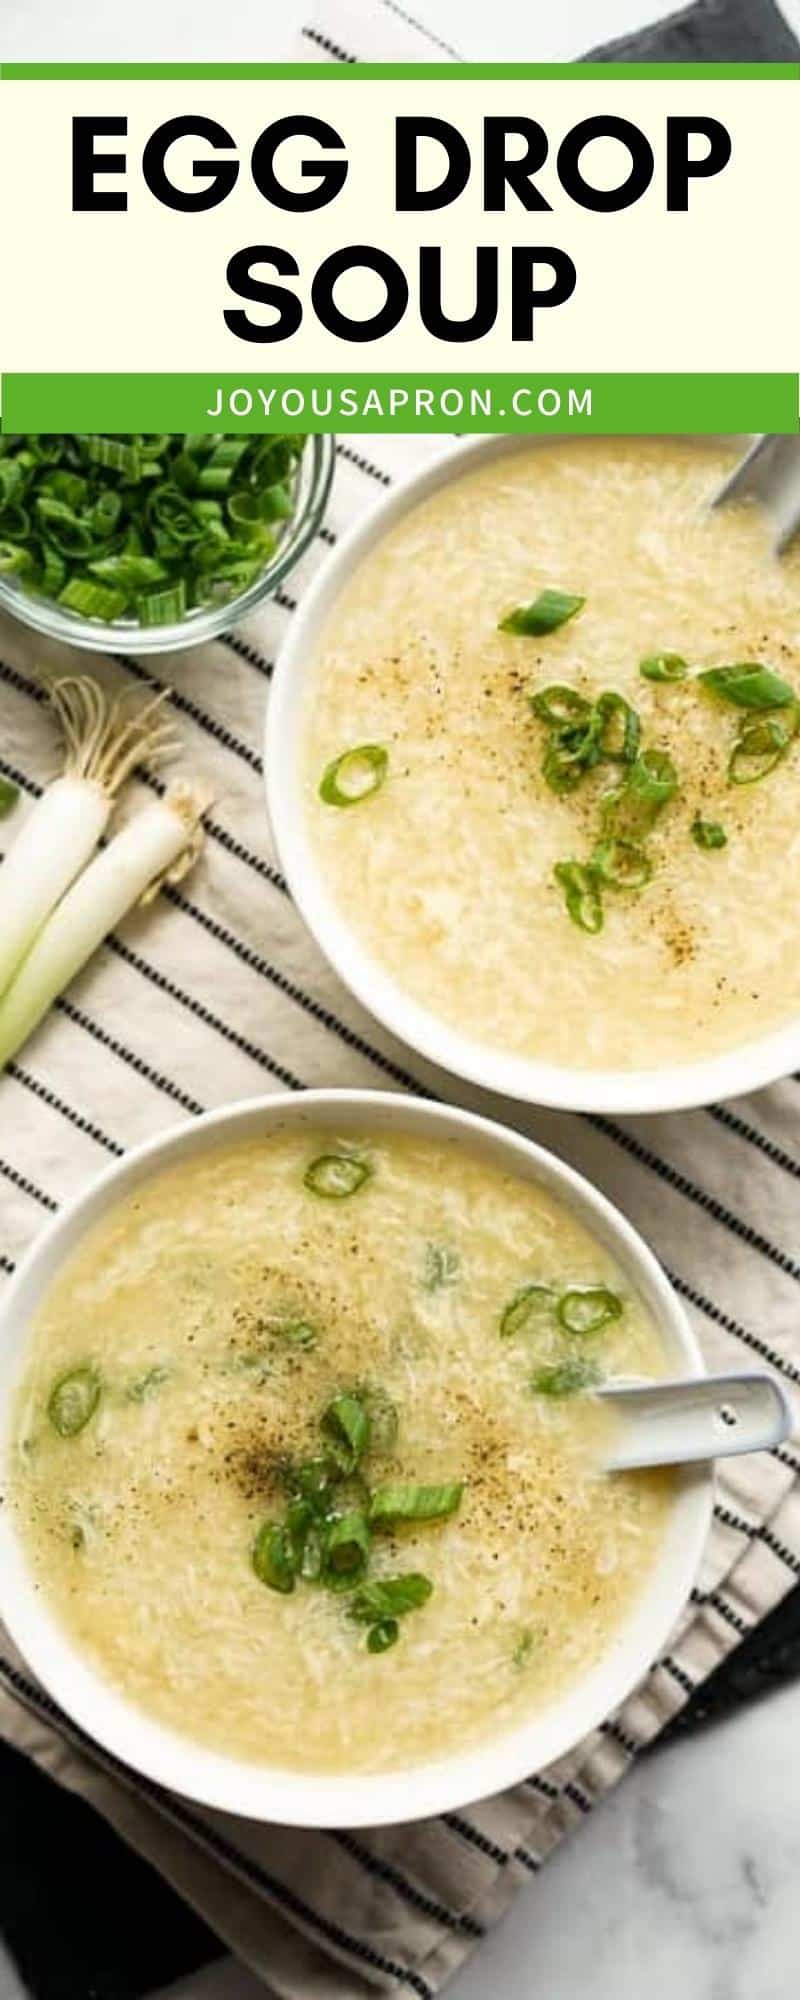 Egg Drop Soup - an easy, healthy, light Asian comfort food and side! Chicken-based broth with silky egg strands. So easy to make - skip Chinese takeout and make this delicious soup today! via @joyousapron